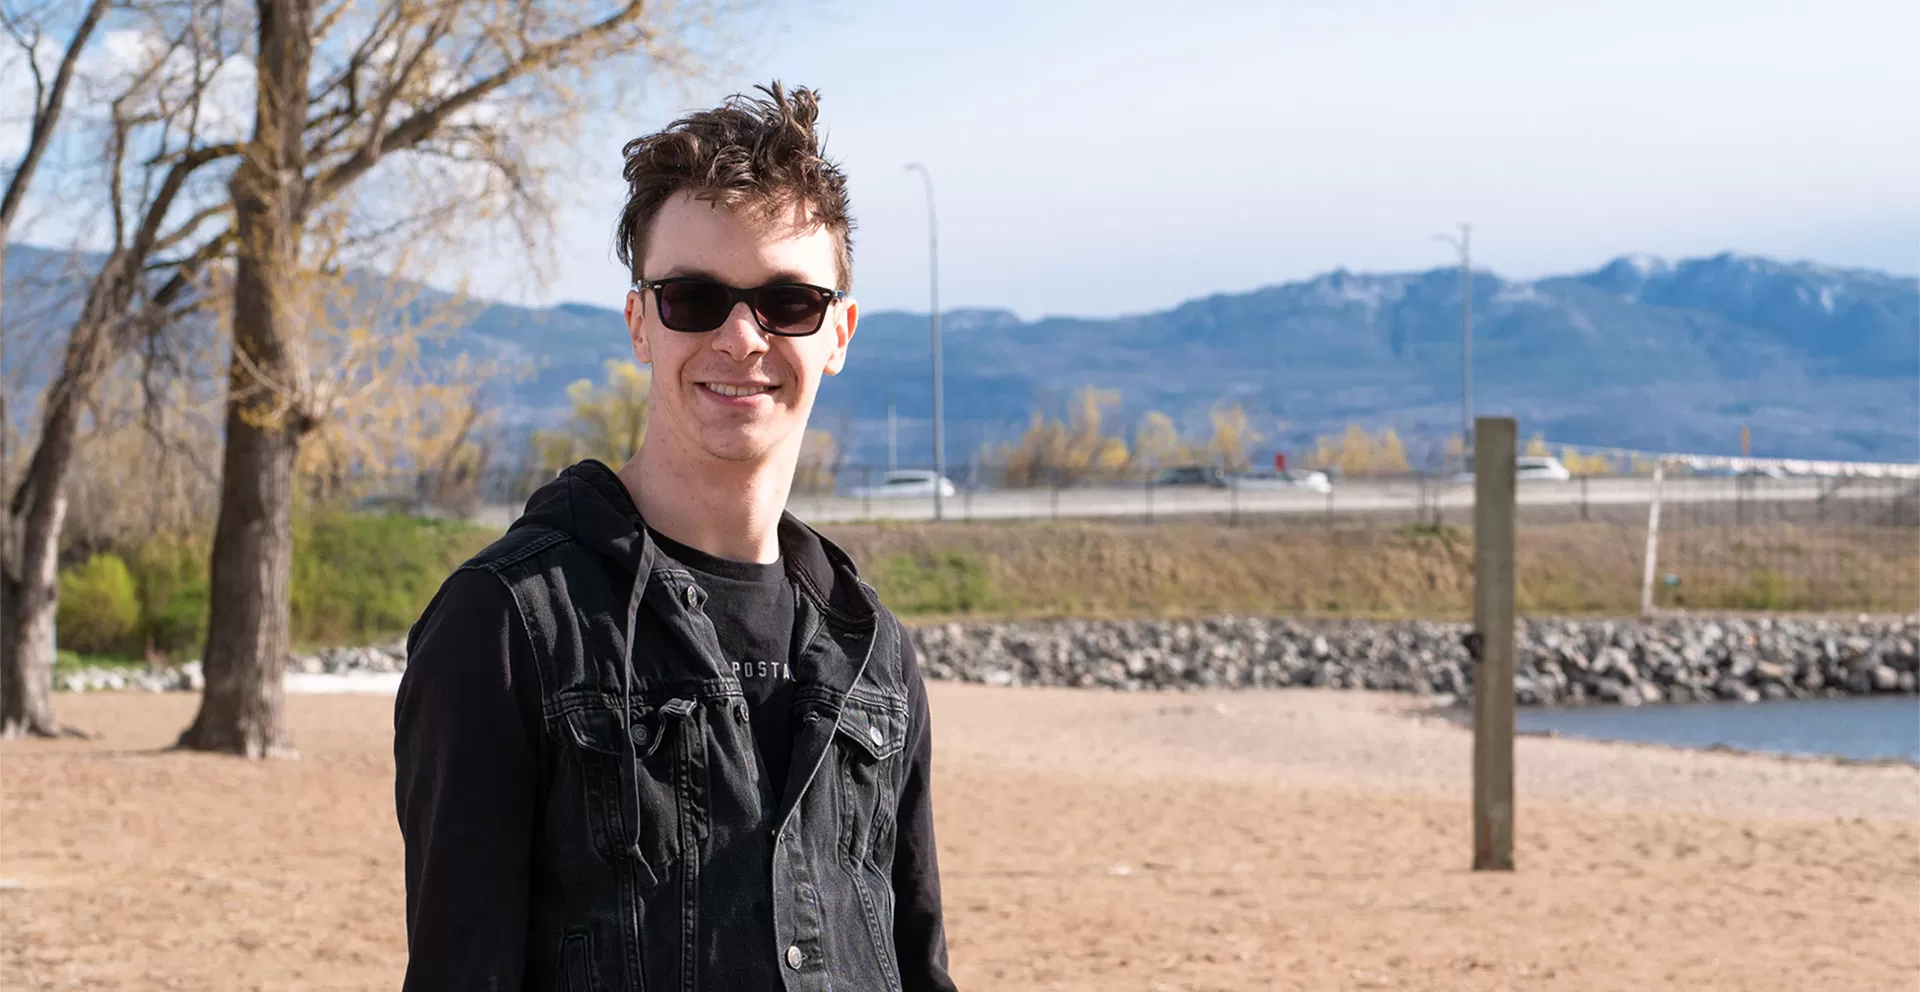 A young man with short dark hair, sunglasses, a black t shirt and black jean jacket is outside on a beach smiling at the camera on a sunny day.  